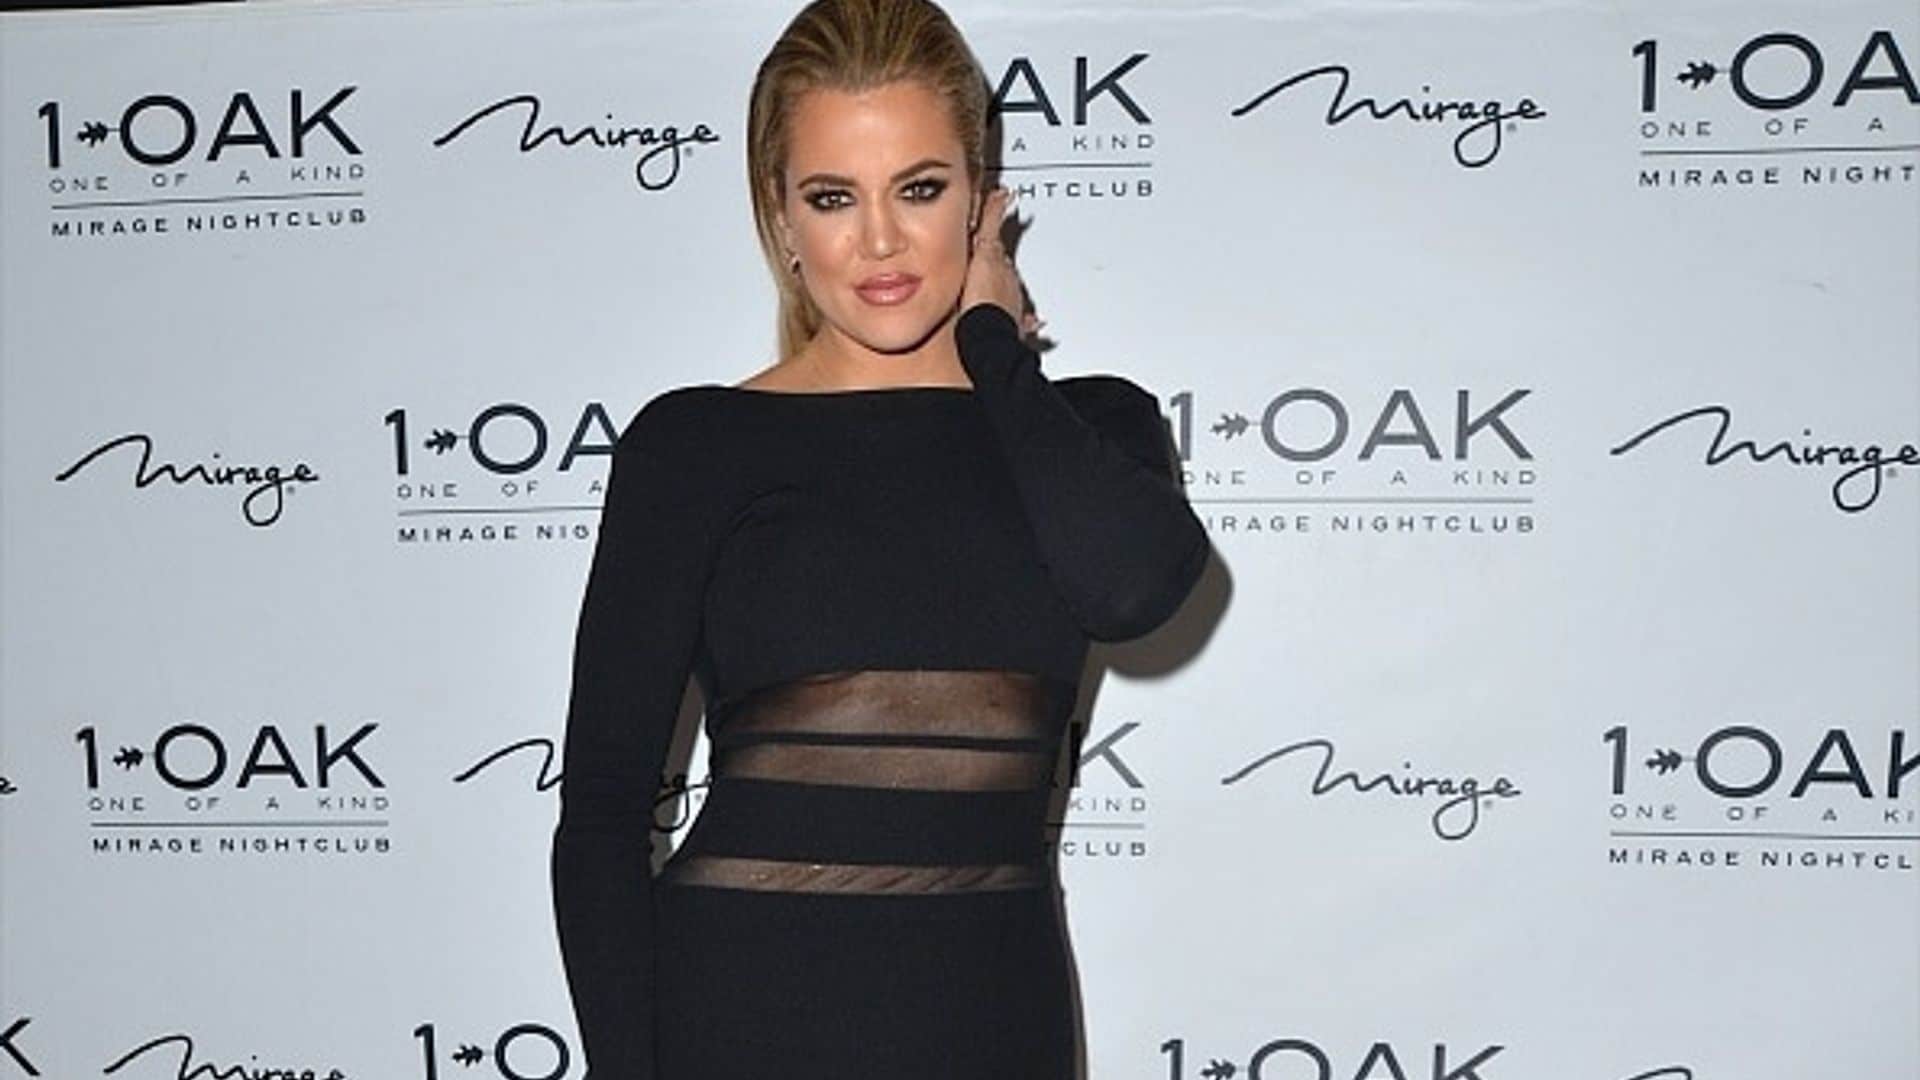 Khloe Kardashian on Kim and Kanye West: 'He wants to build her up'